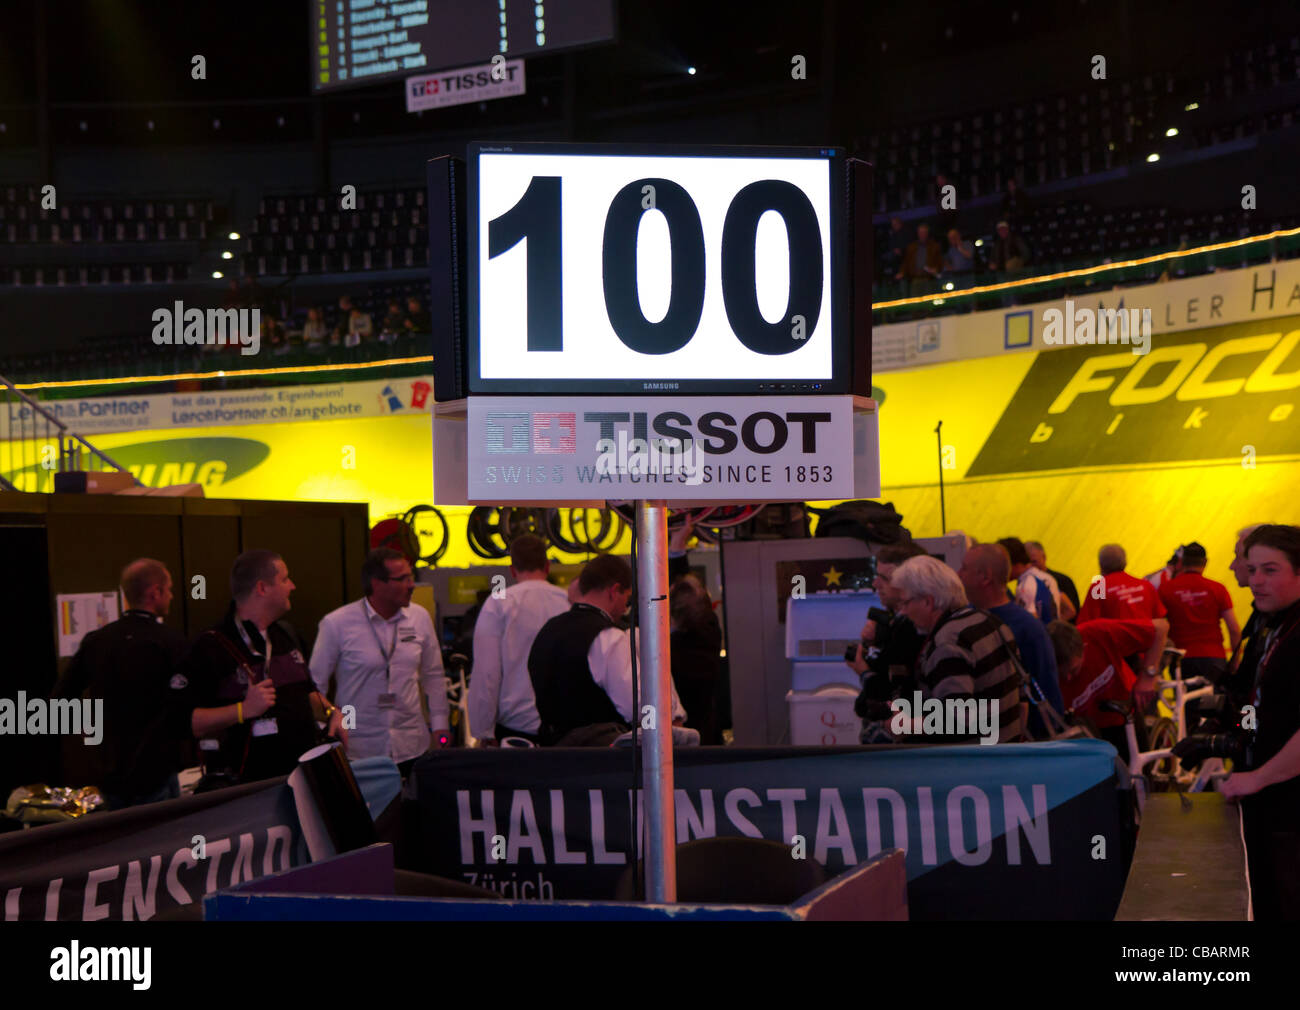 Round count display indicating the rounds left to finish at Sixday-Nights Zürich 2011 at Zurich Hallenstadion Stock Photo